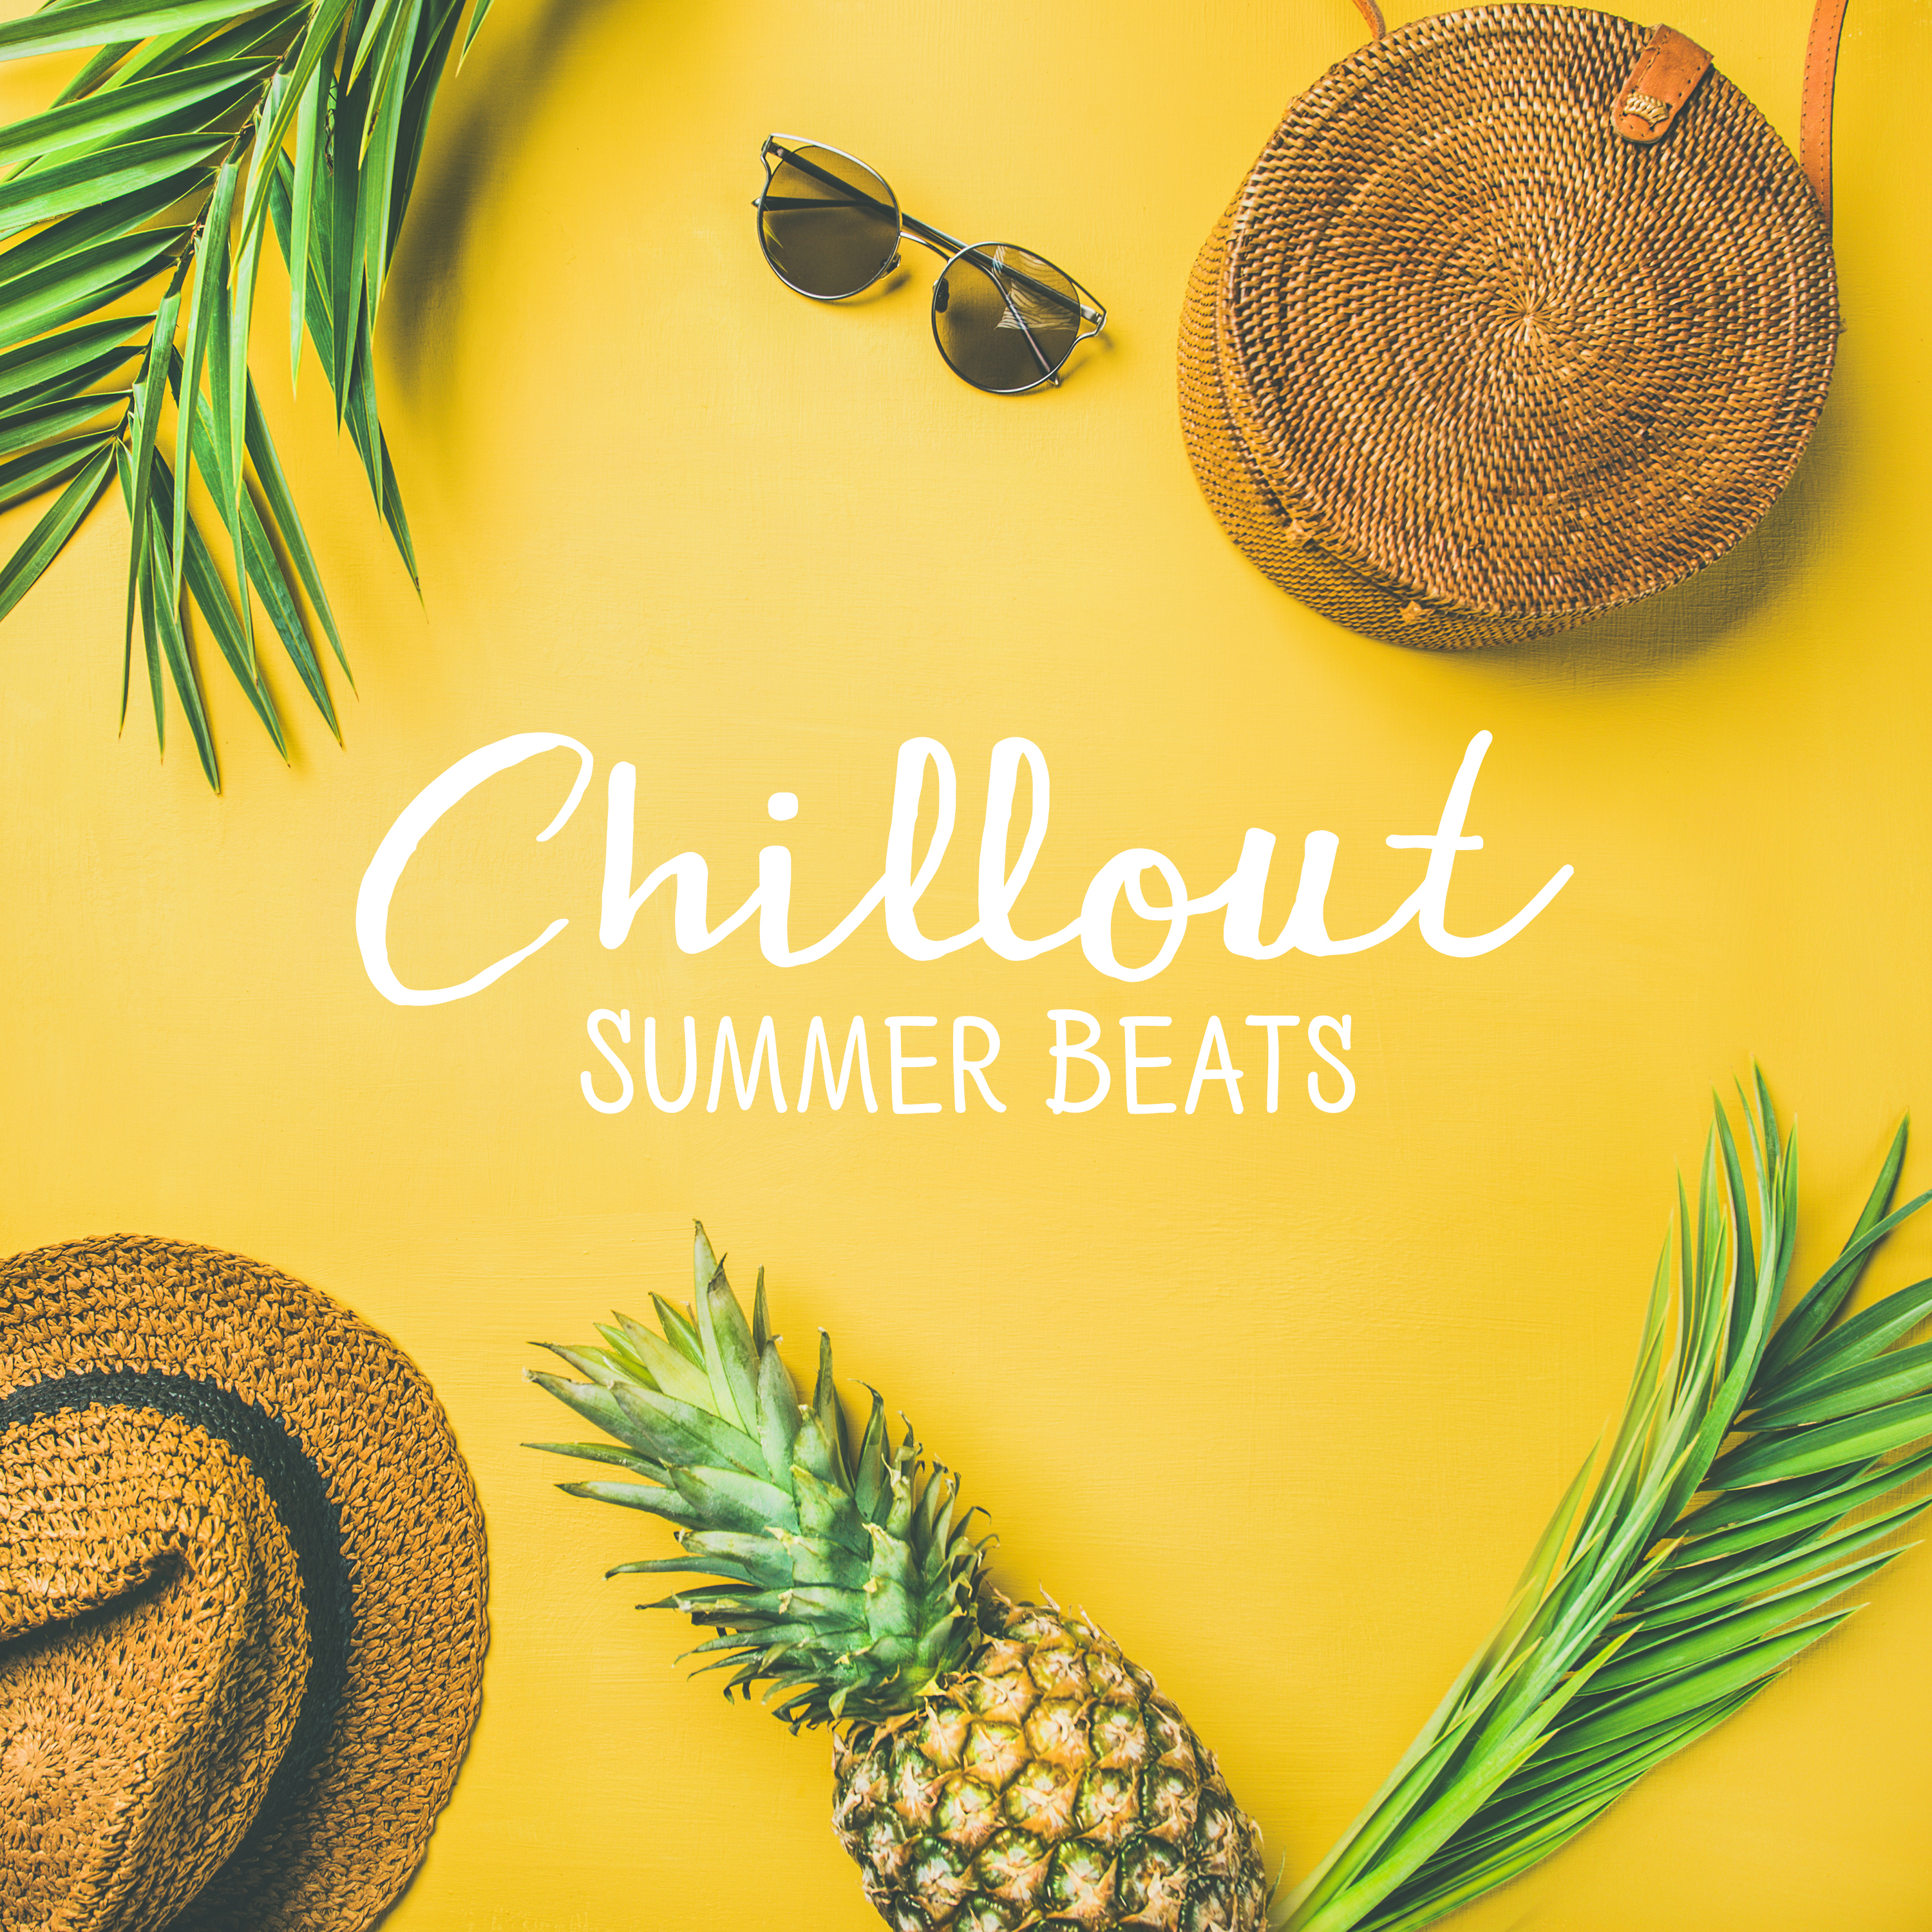 Chillout Summer Beats – Easy Listening, Summertime Memories, Chill Lounge, Stress Free